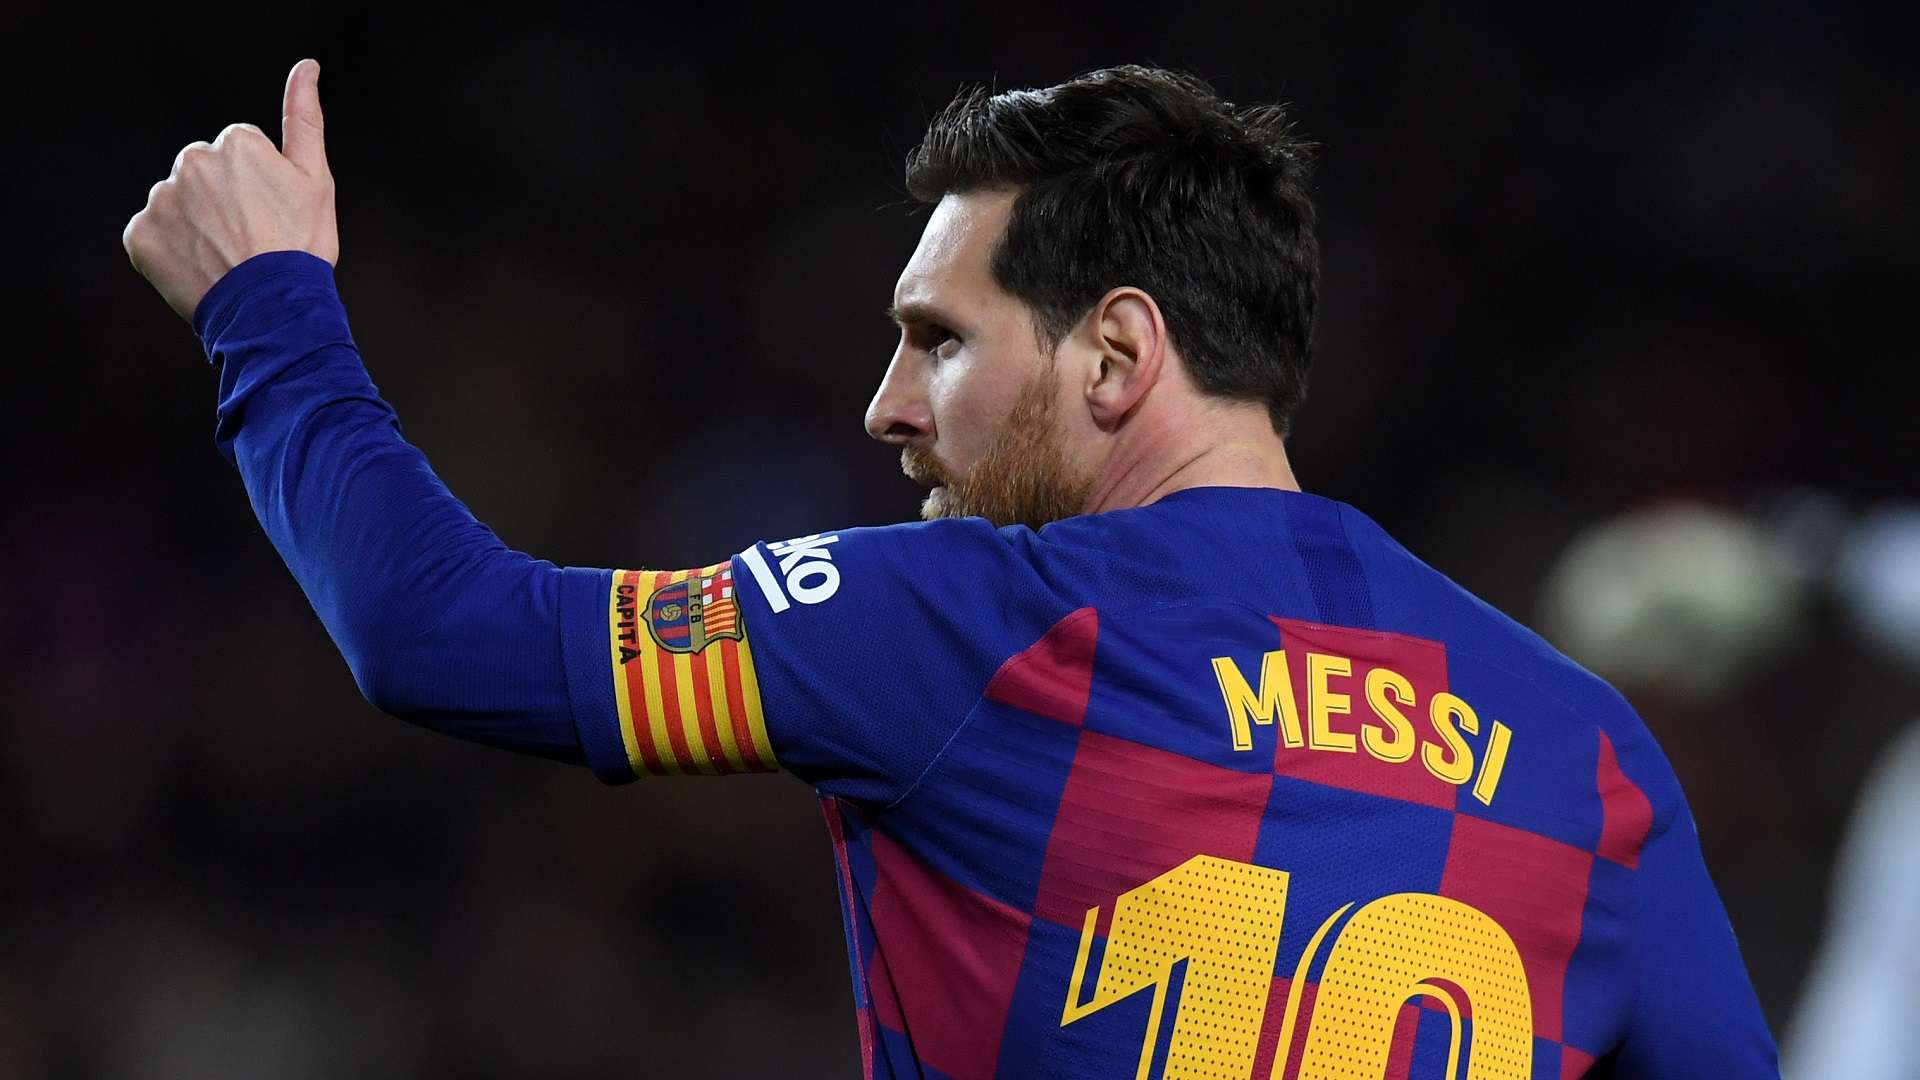 Why does Messi wear 10?